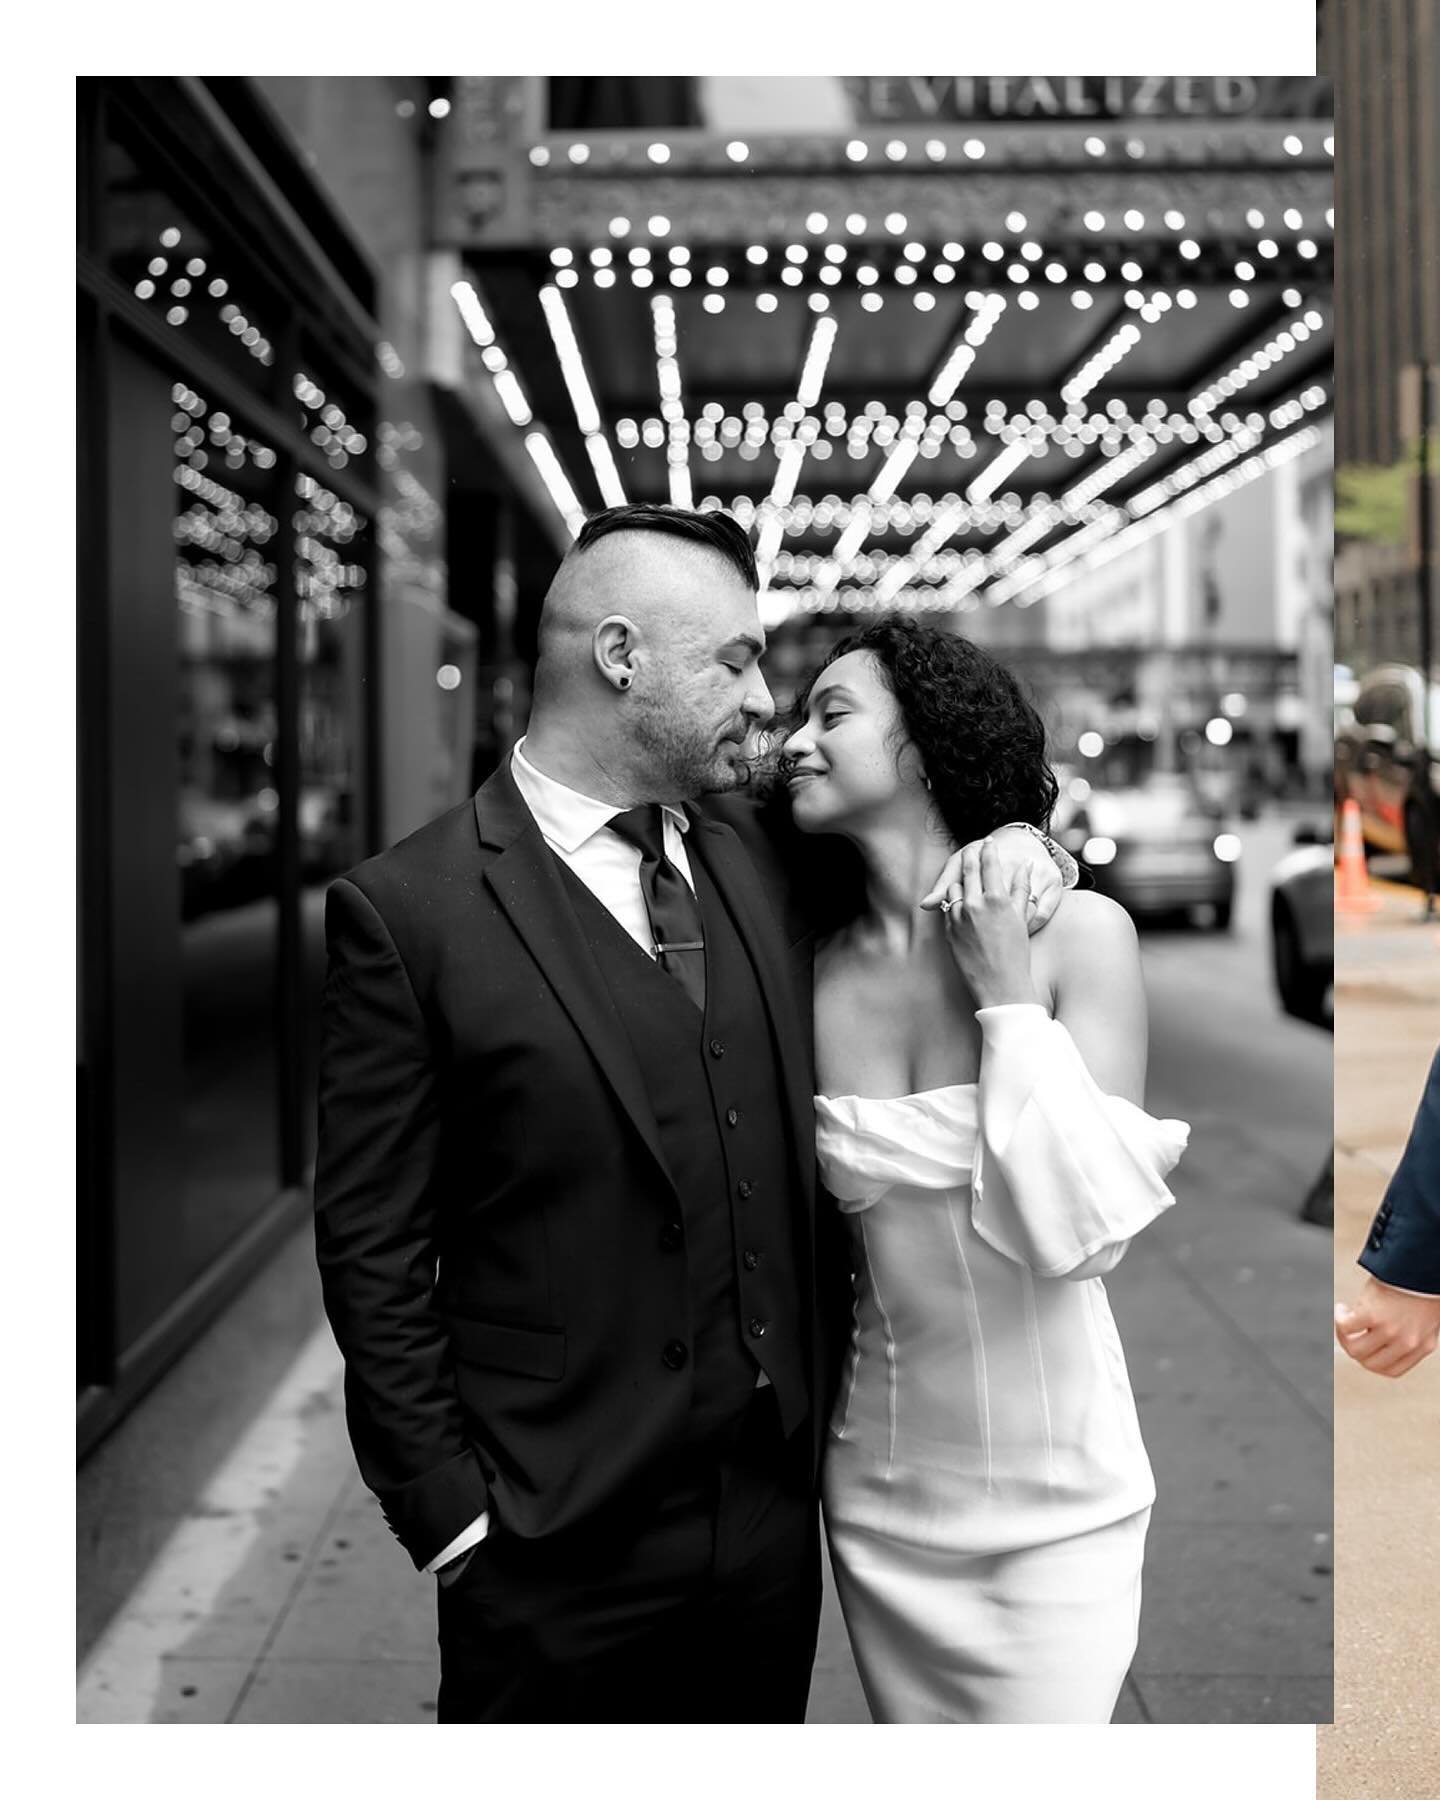 A Chicago elopement story! It was so fun meeting these two at the courthouse for a quick portrait session after their ceremony. We had a perfect gloomy morning that really made all the pretty city lights sparkle!